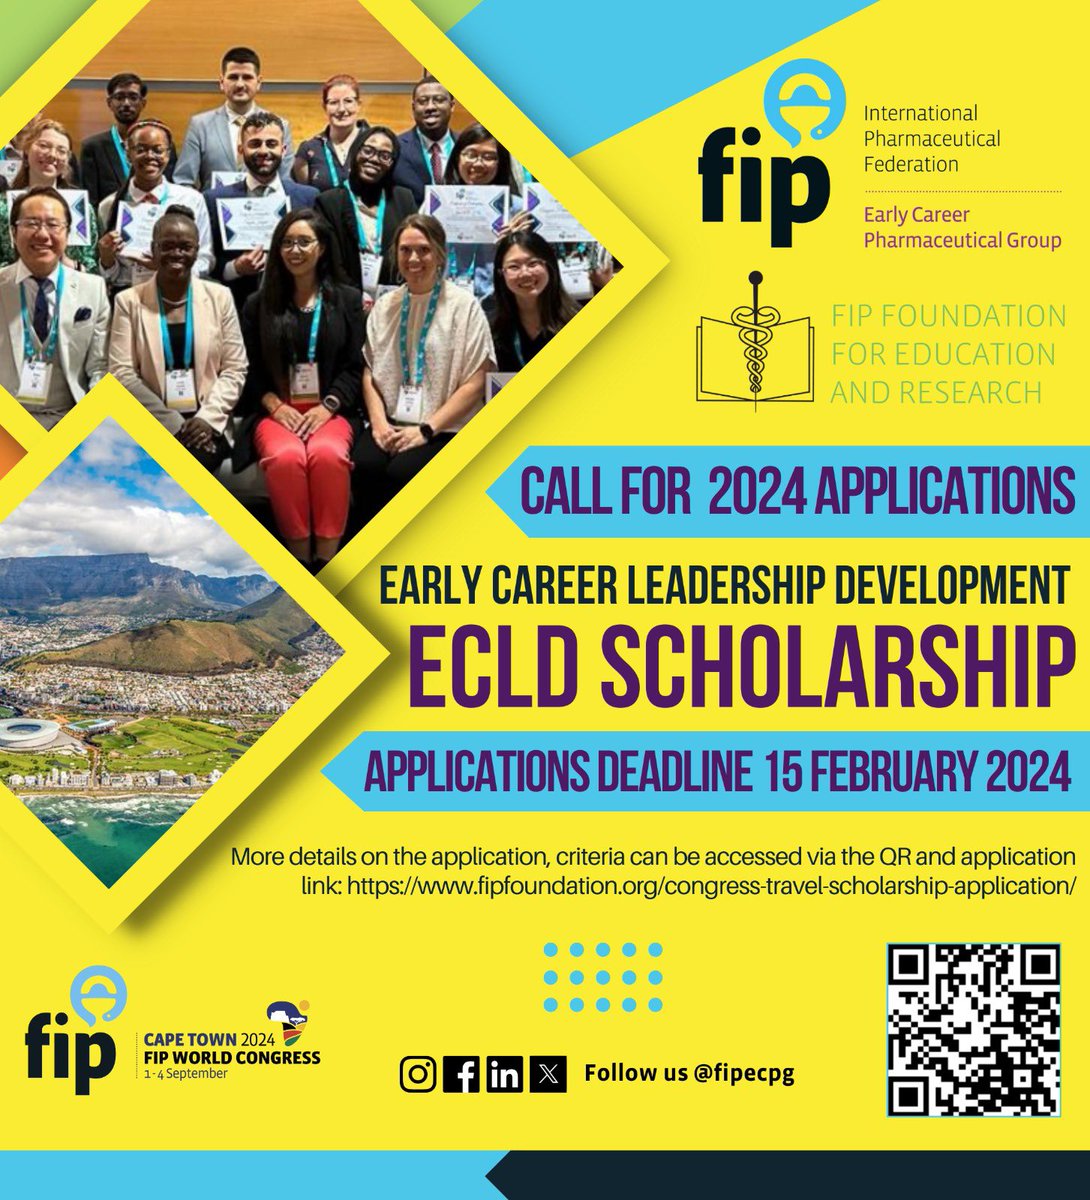 A new year also means NEW #opportunities! Applications are now open for the FIP Early Career Leadership Development Scholarship! The FIP Foundation will award six scholarships to assist young pharmacists or pharmaceutical scientists to attend the 2024 FIP World Congress and…